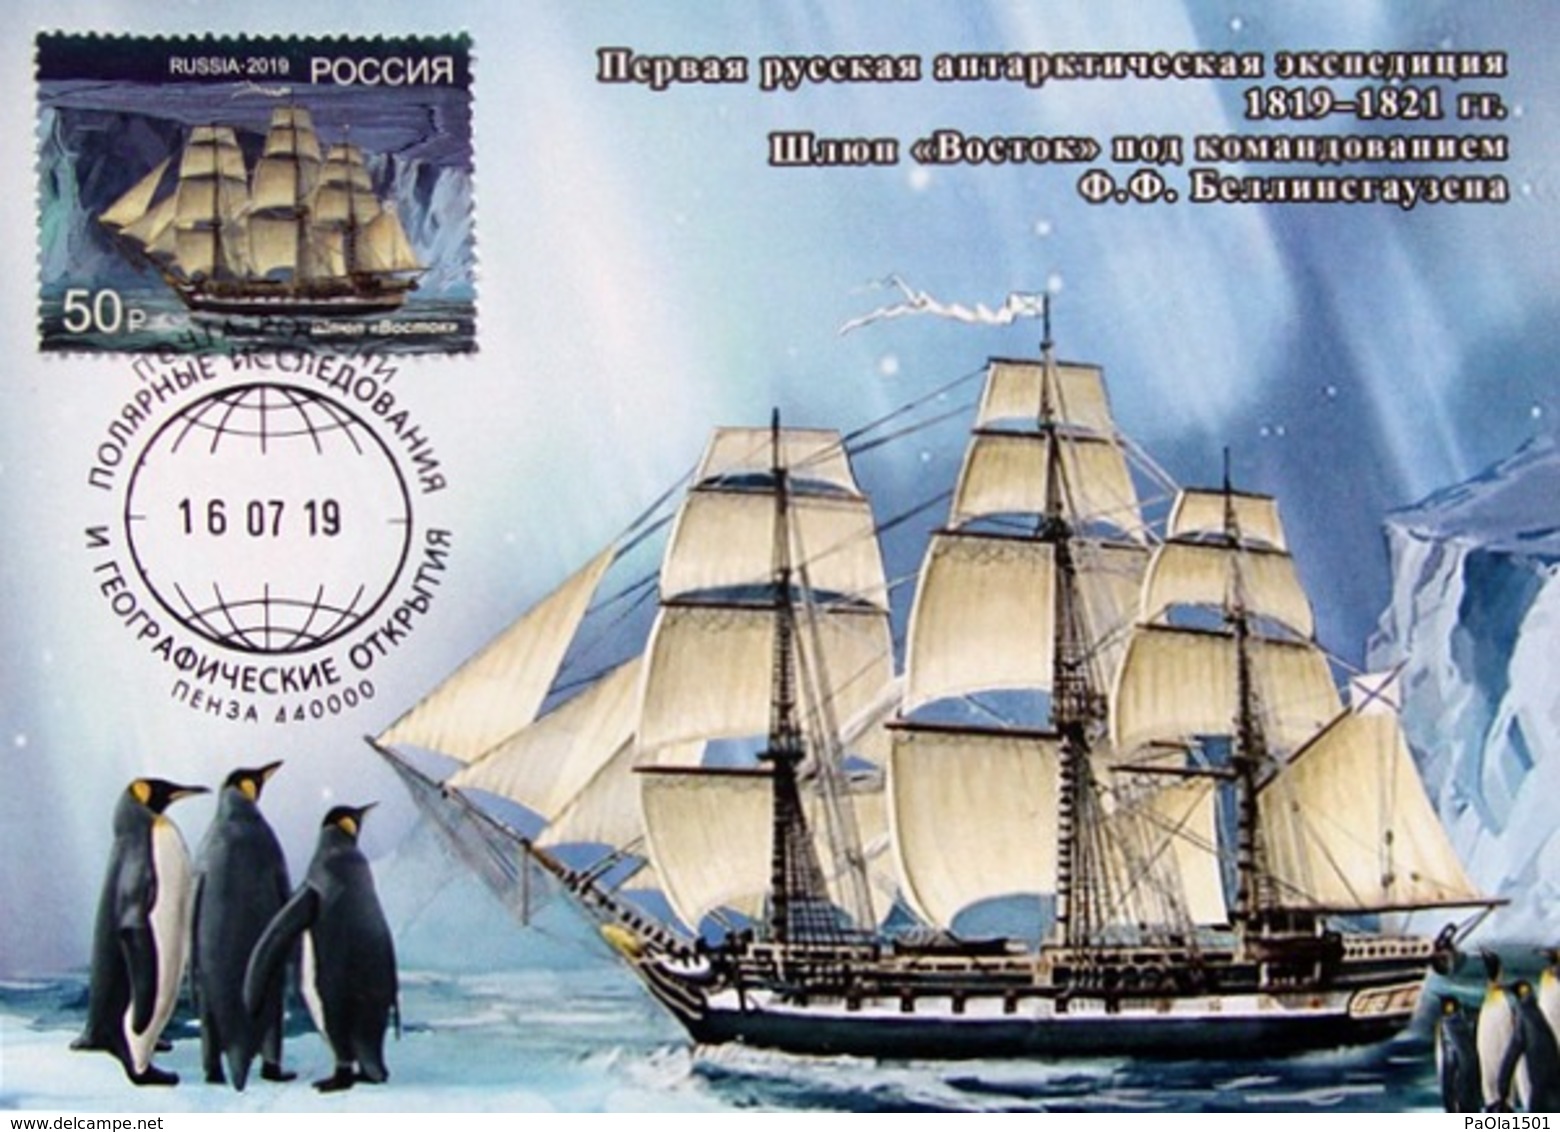 2496 - 2497 To The 200th Anniversary Of The Discovery Of Antarctica Sloops Vostok And Mirniy Maximum Cards Moscow 2019 - Cartes Maximum